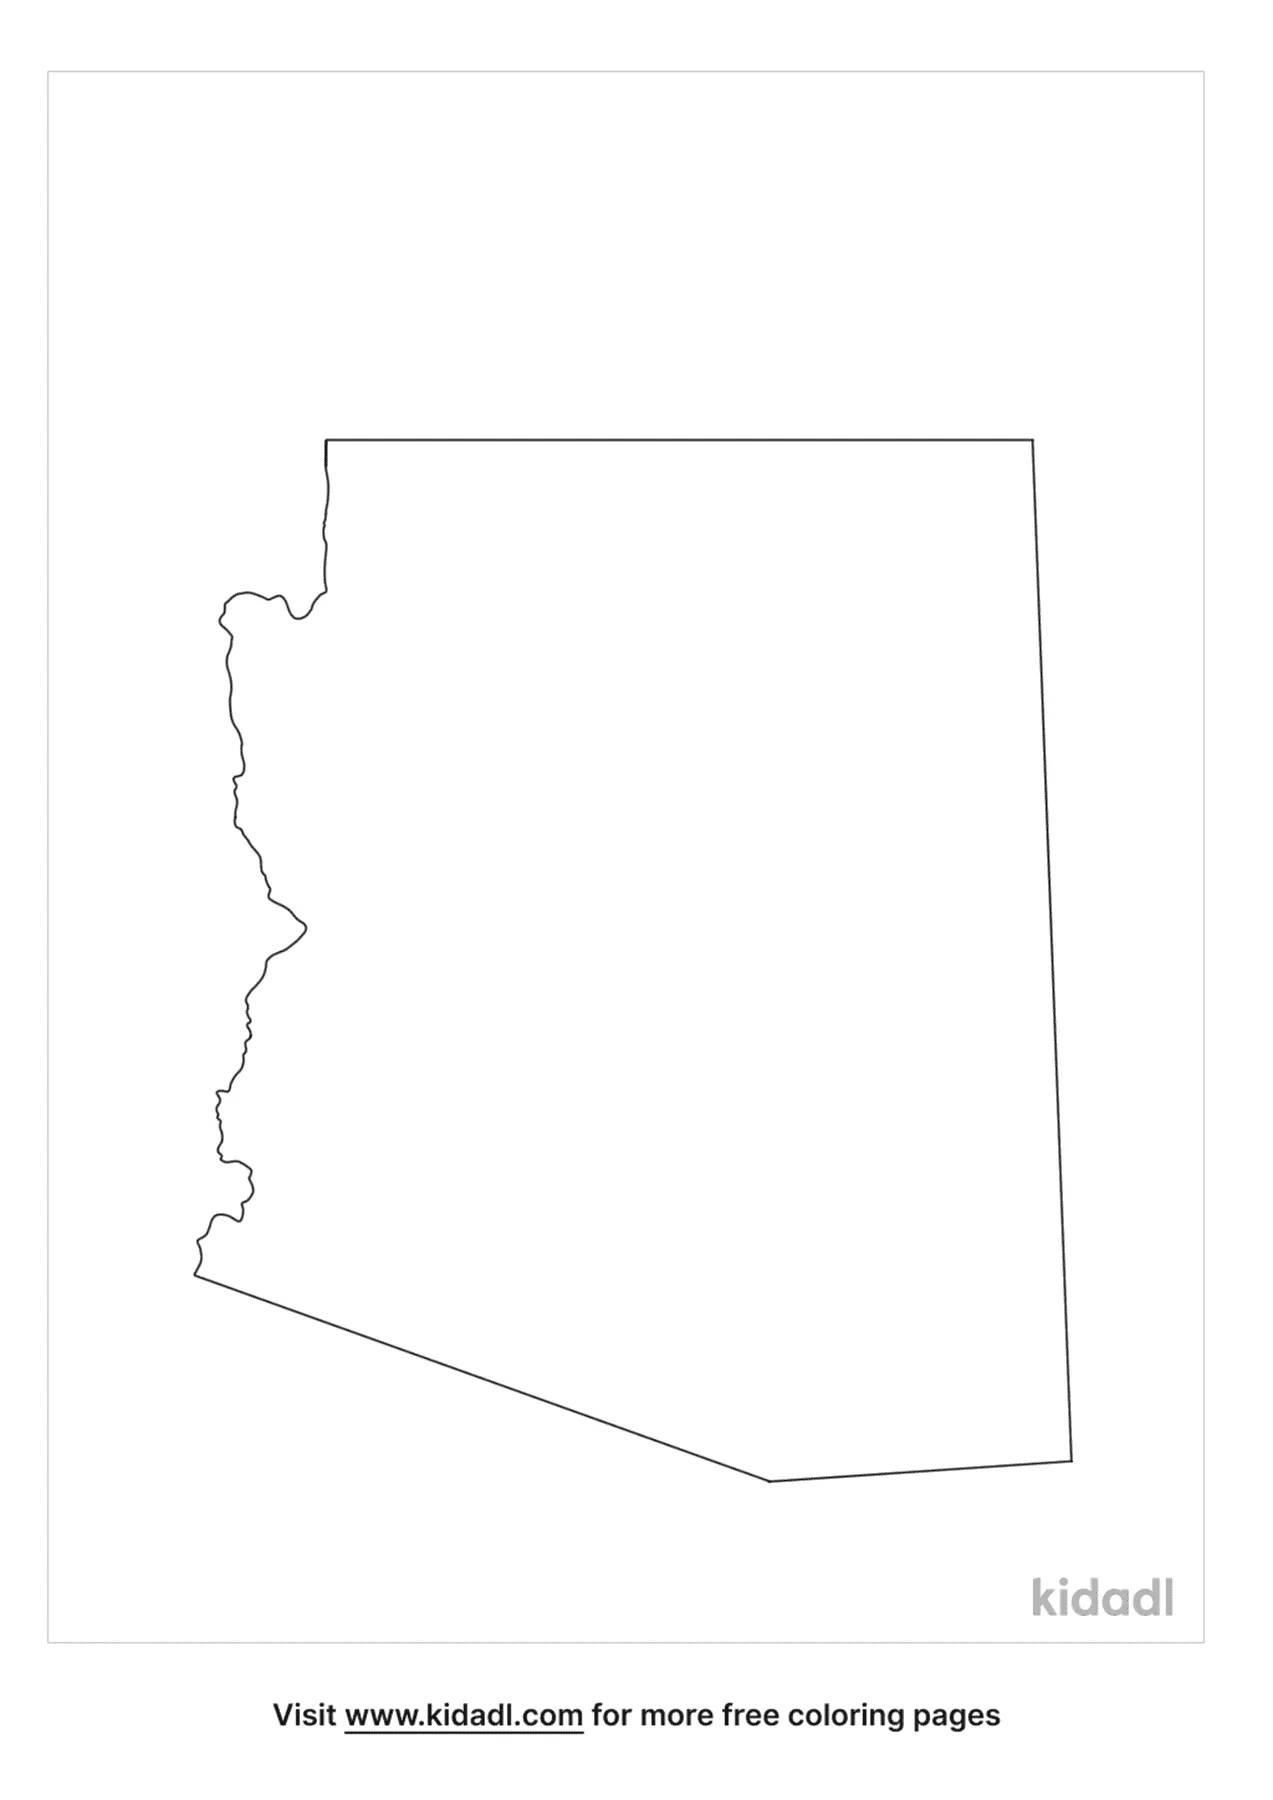 arizona state coloring pages logo